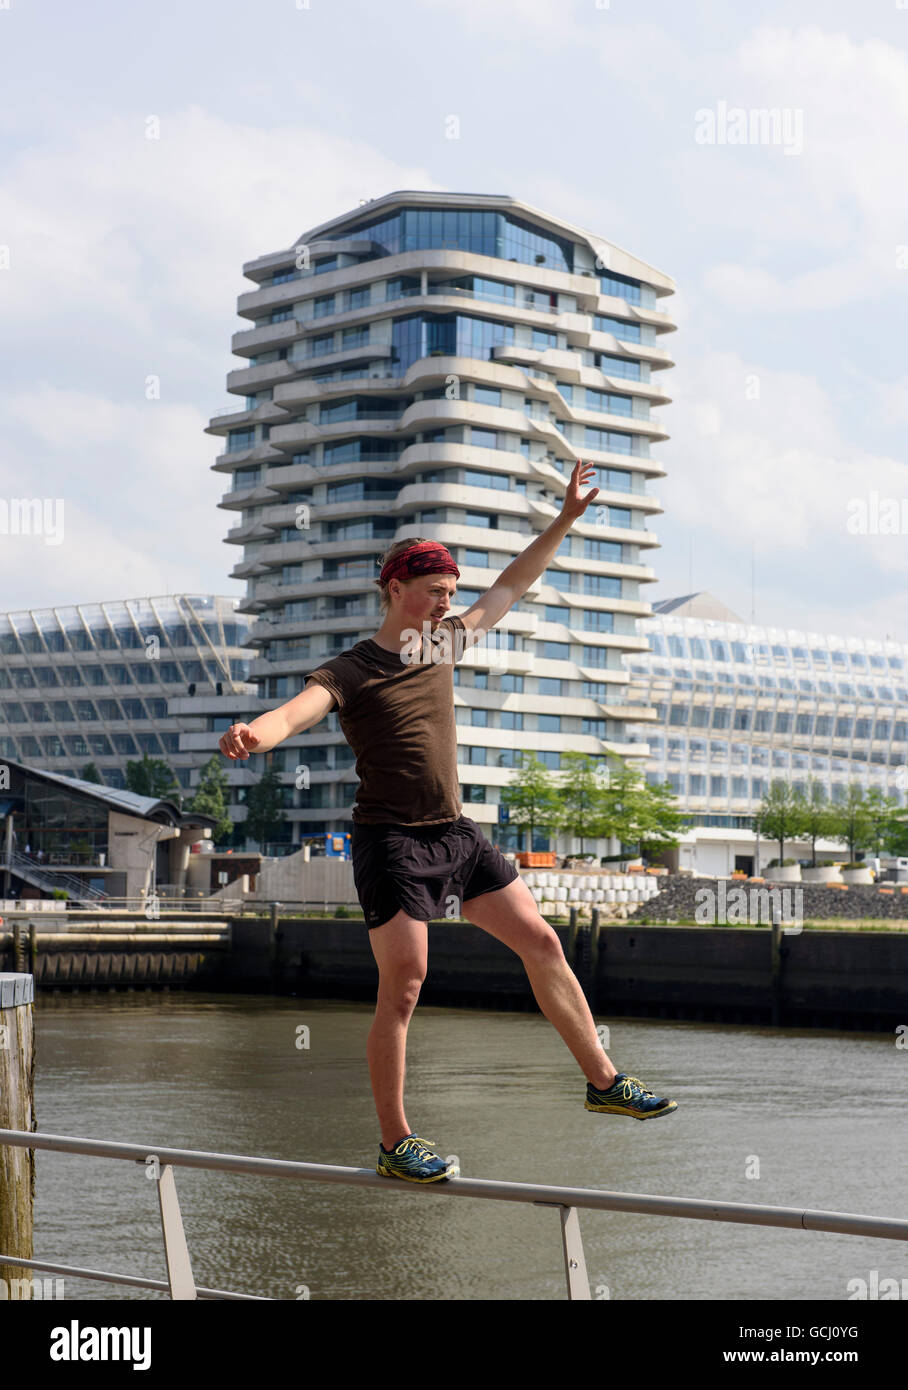 Streetsport 'Parkour' in front of  Marco-Polo-Tower in  Hafencity, Hamburg, Germany Stock Photo